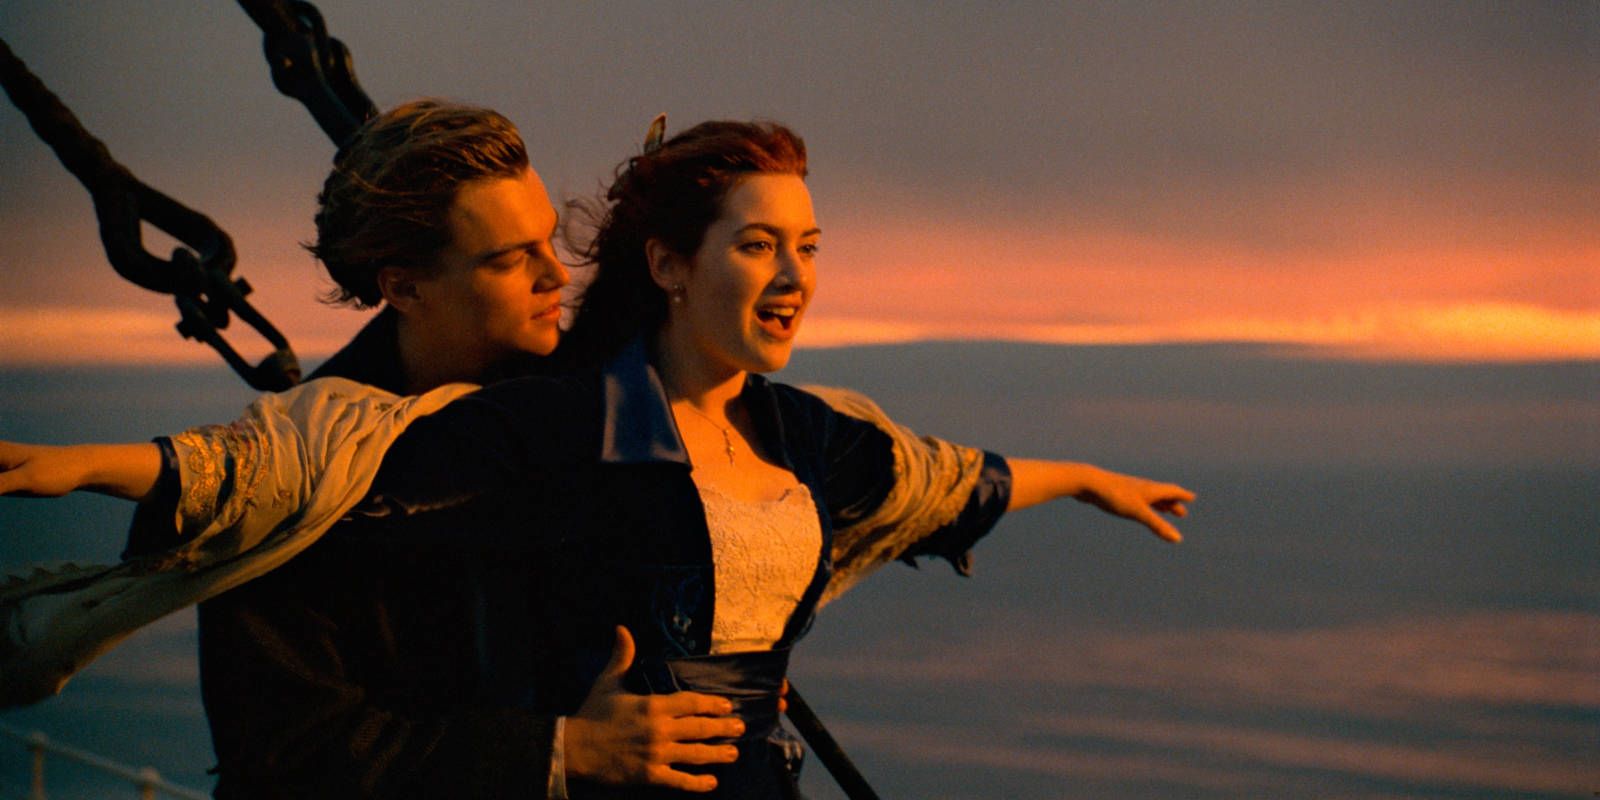 Titanic' Cast, Then and Now: Leonardo DiCaprio, Kate Winslet and More